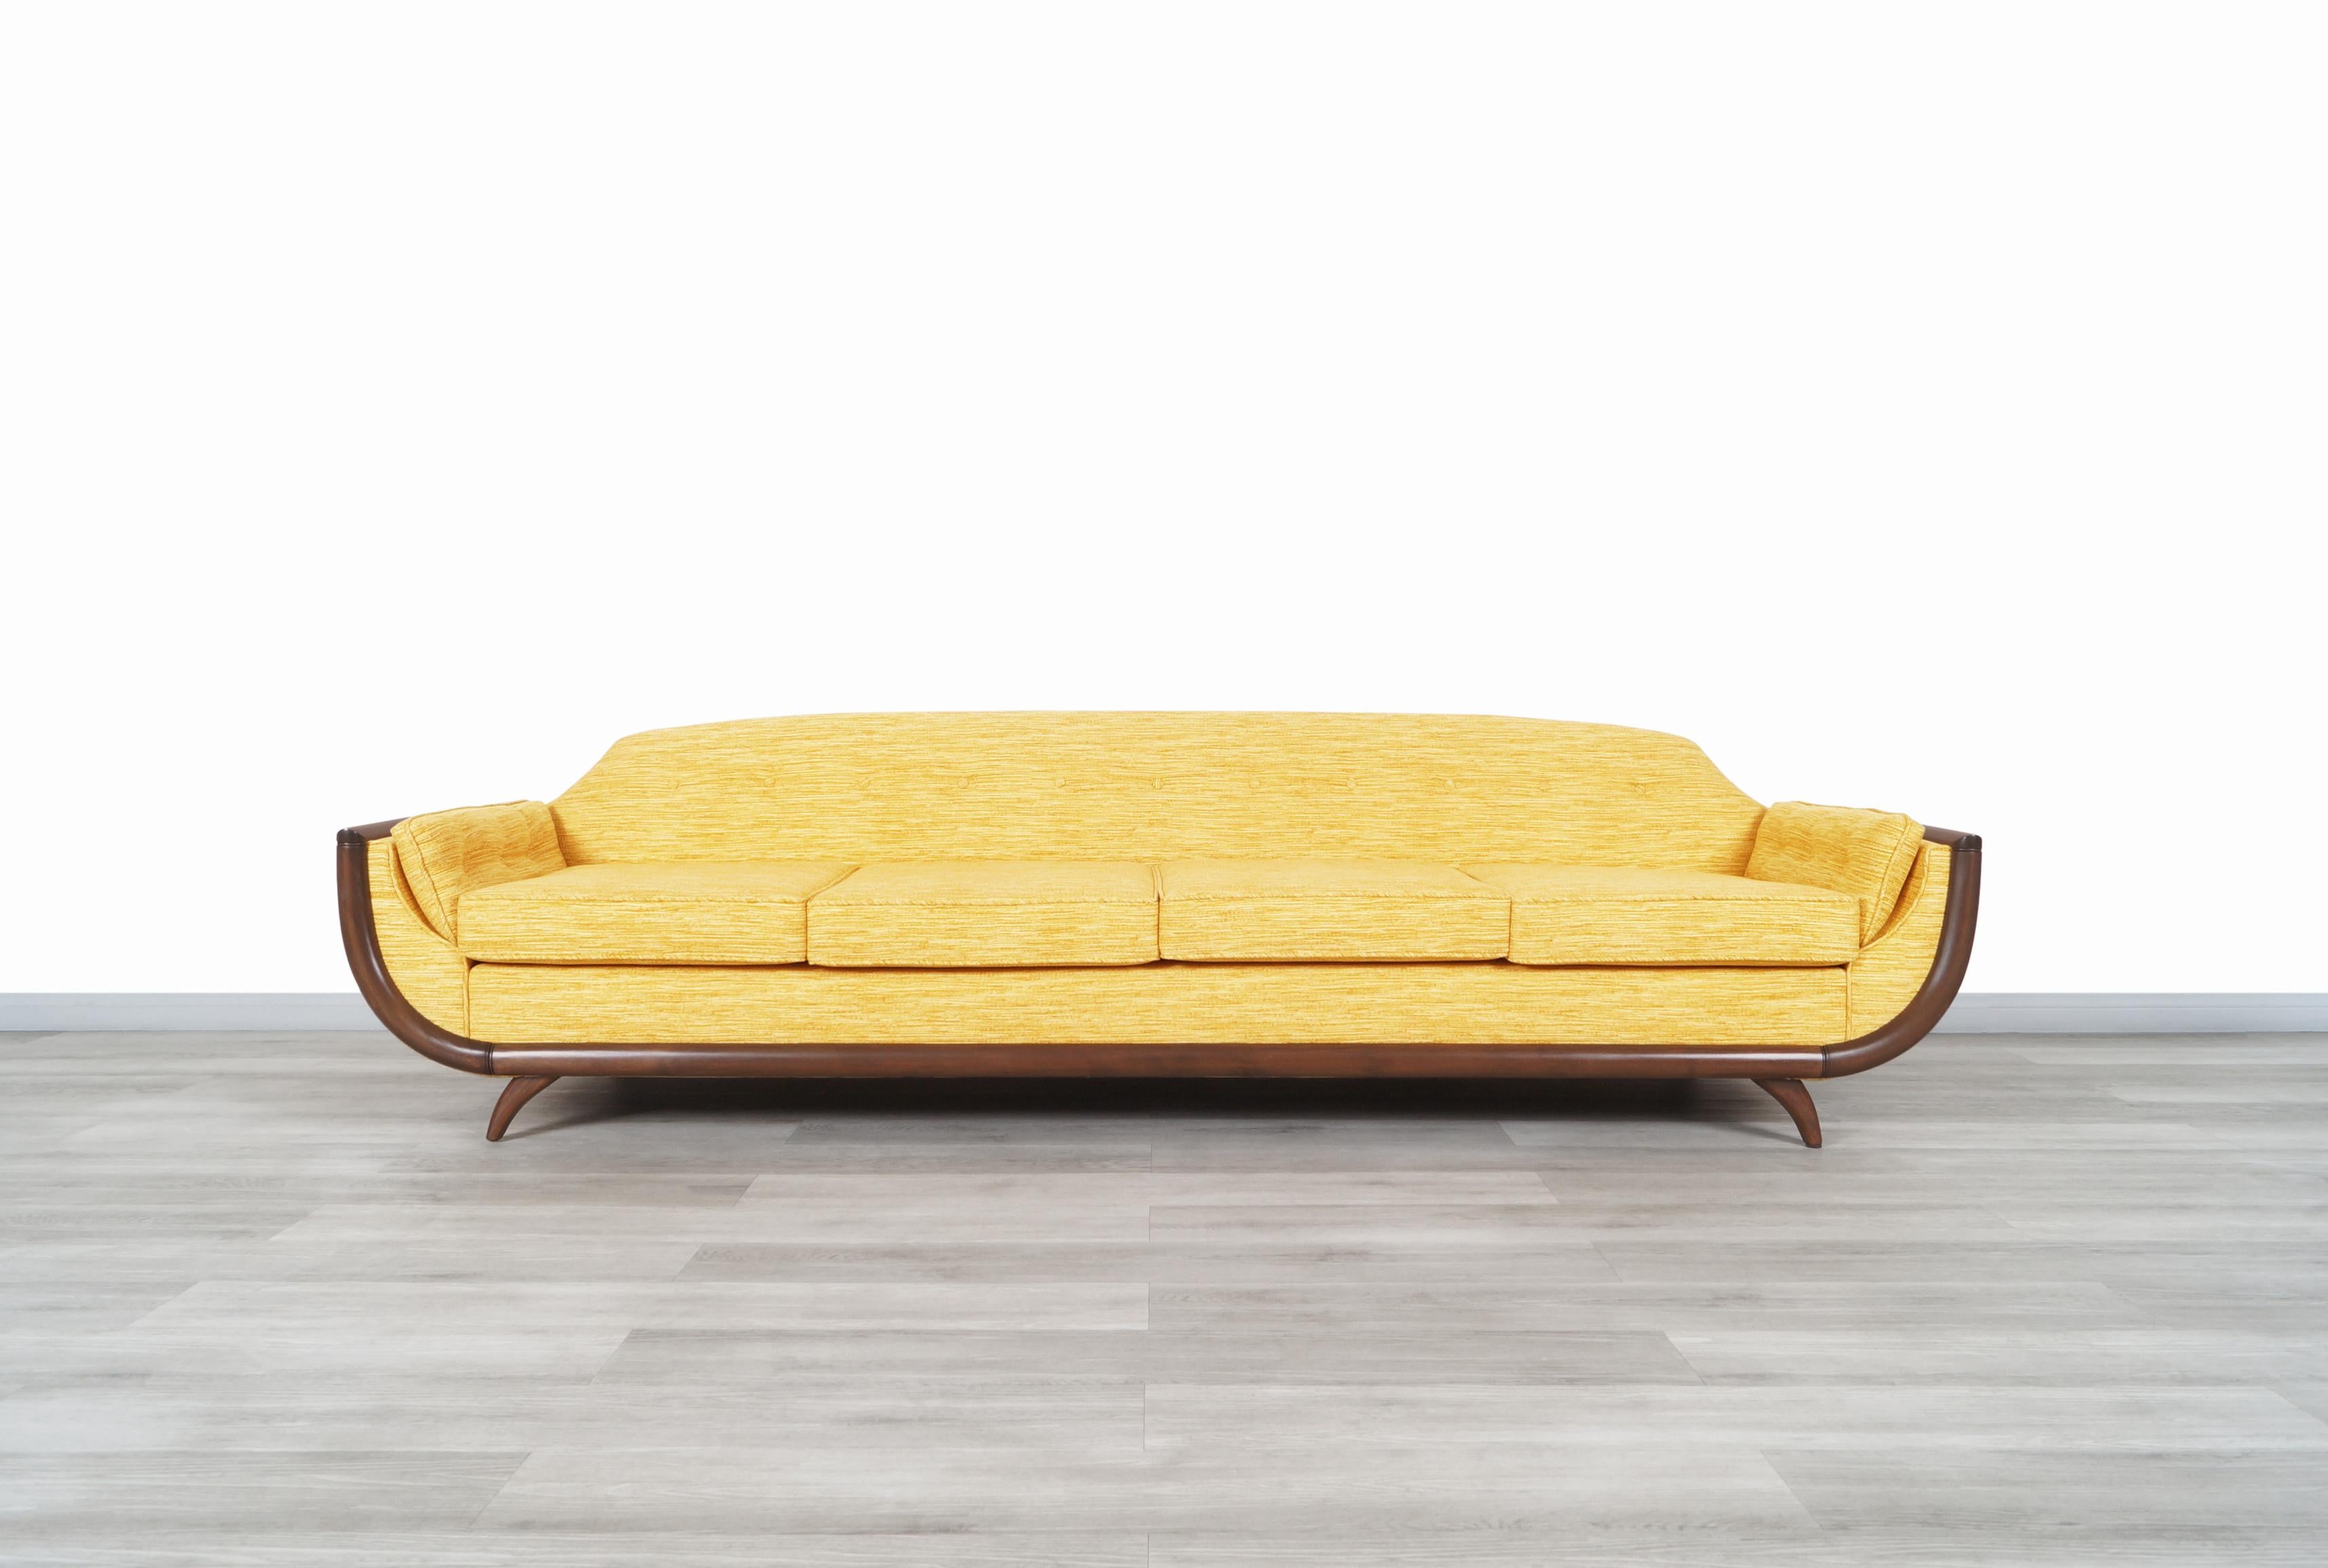 Beautiful vintage walnut “Gondola” sofa designed in the manner of Adrian Pearsall in the United States, circa 1960s. This modernist sofa has a captivating design and represents in a significant way the designs of Adrian Pearsall through the curve